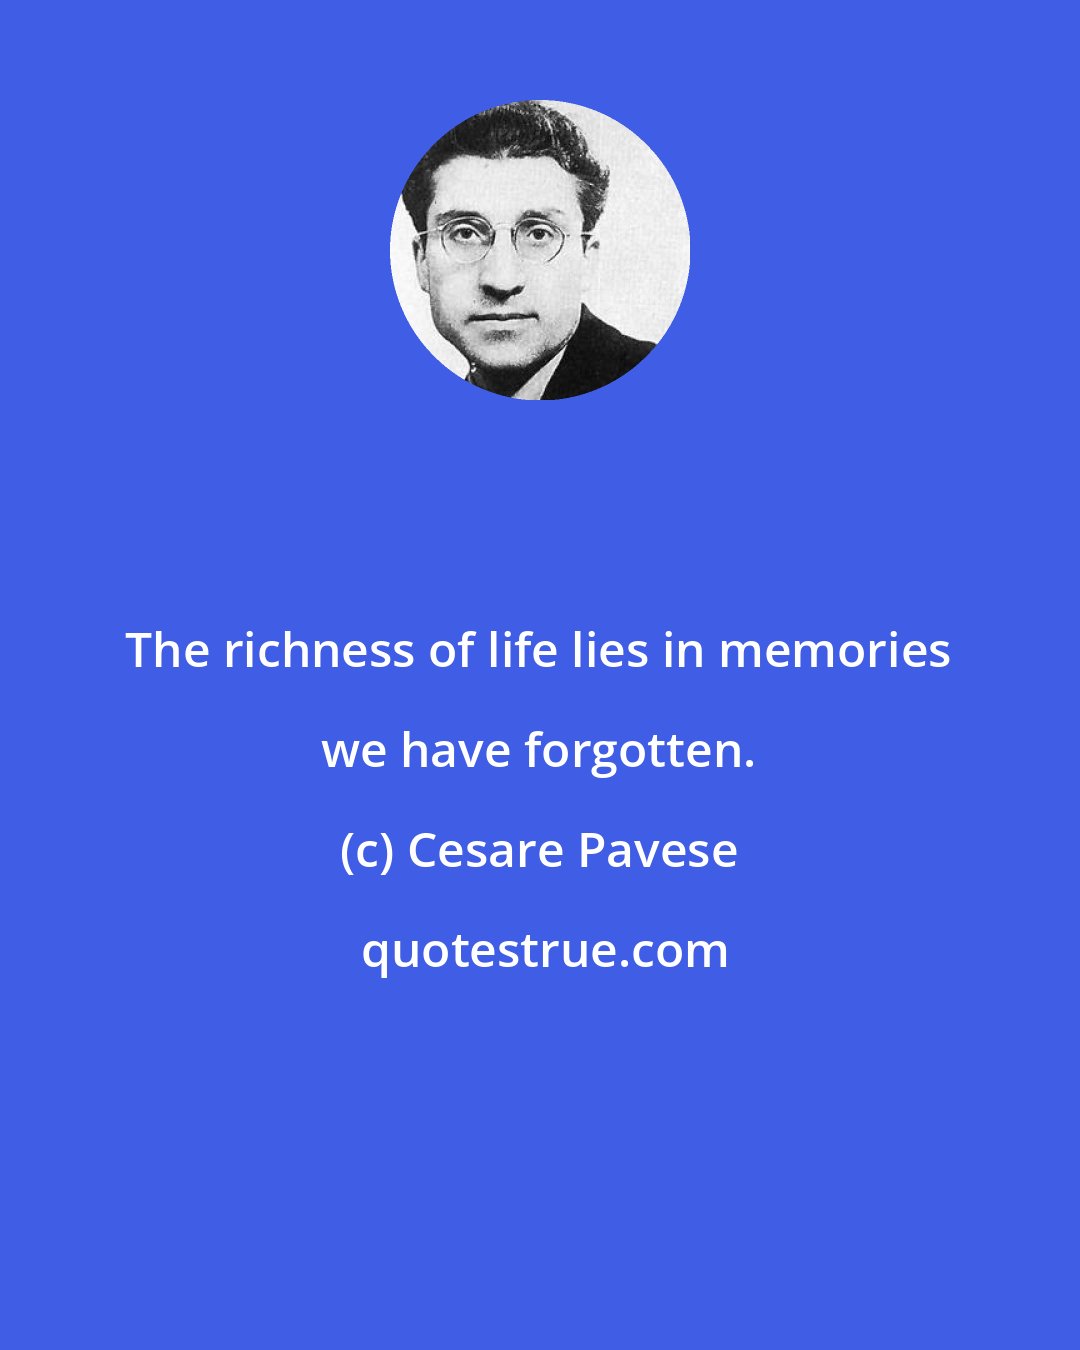 Cesare Pavese: The richness of life lies in memories we have forgotten.